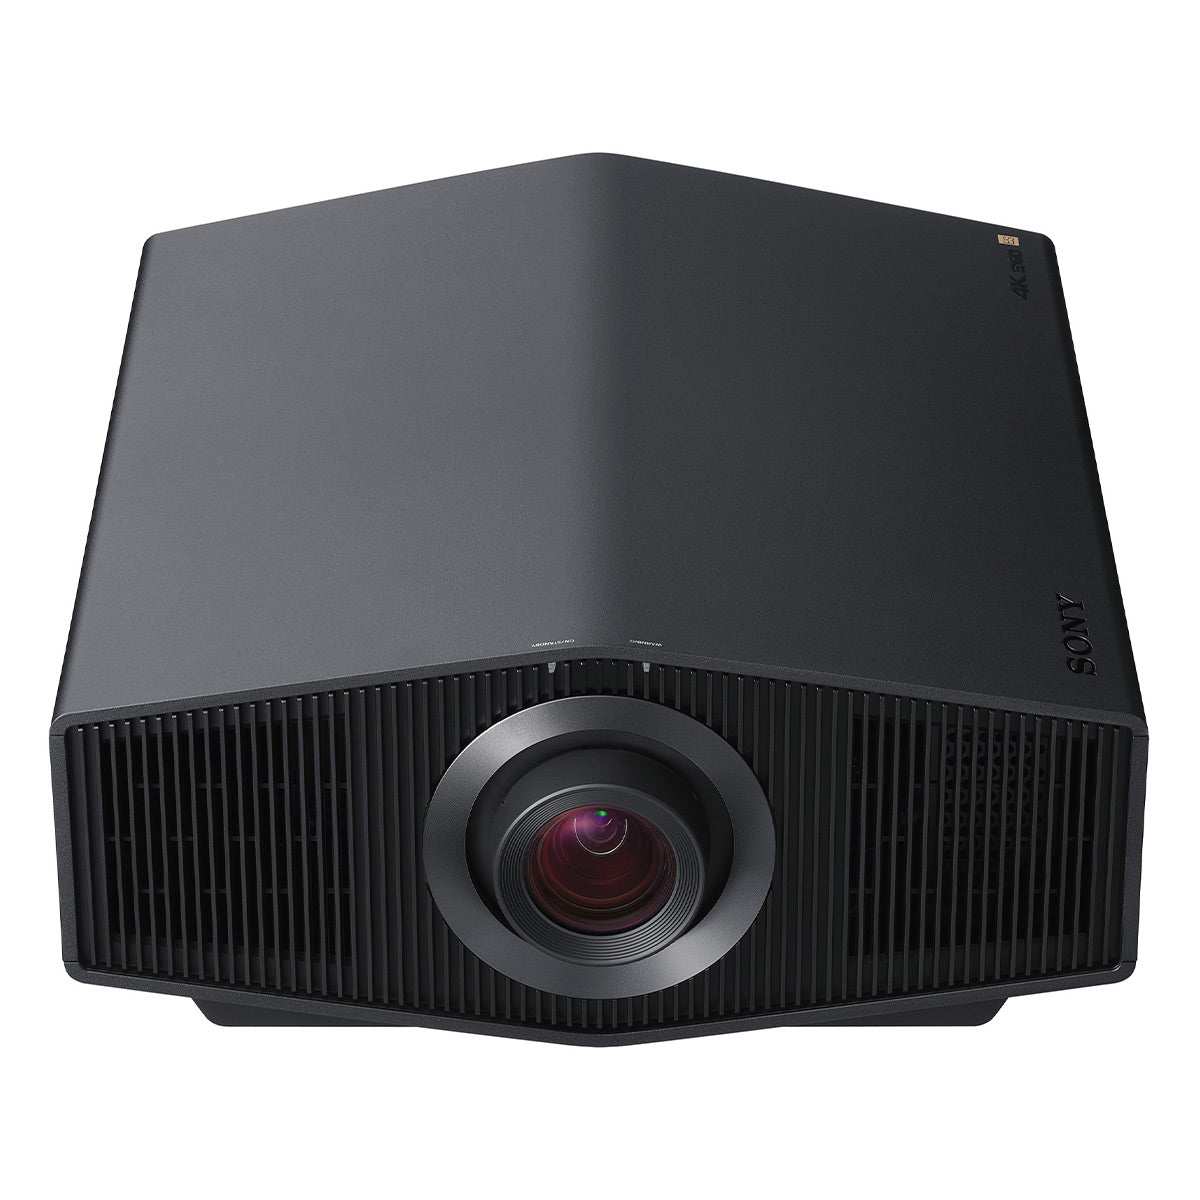 Sony VPL-XW6000ES 4K HDR Laser Home Theater Projector with Wide Dynamic Range Optics, 95% DCI-P3 Wide Color Gamut, and 2,500 Lumen Brightness (Black)